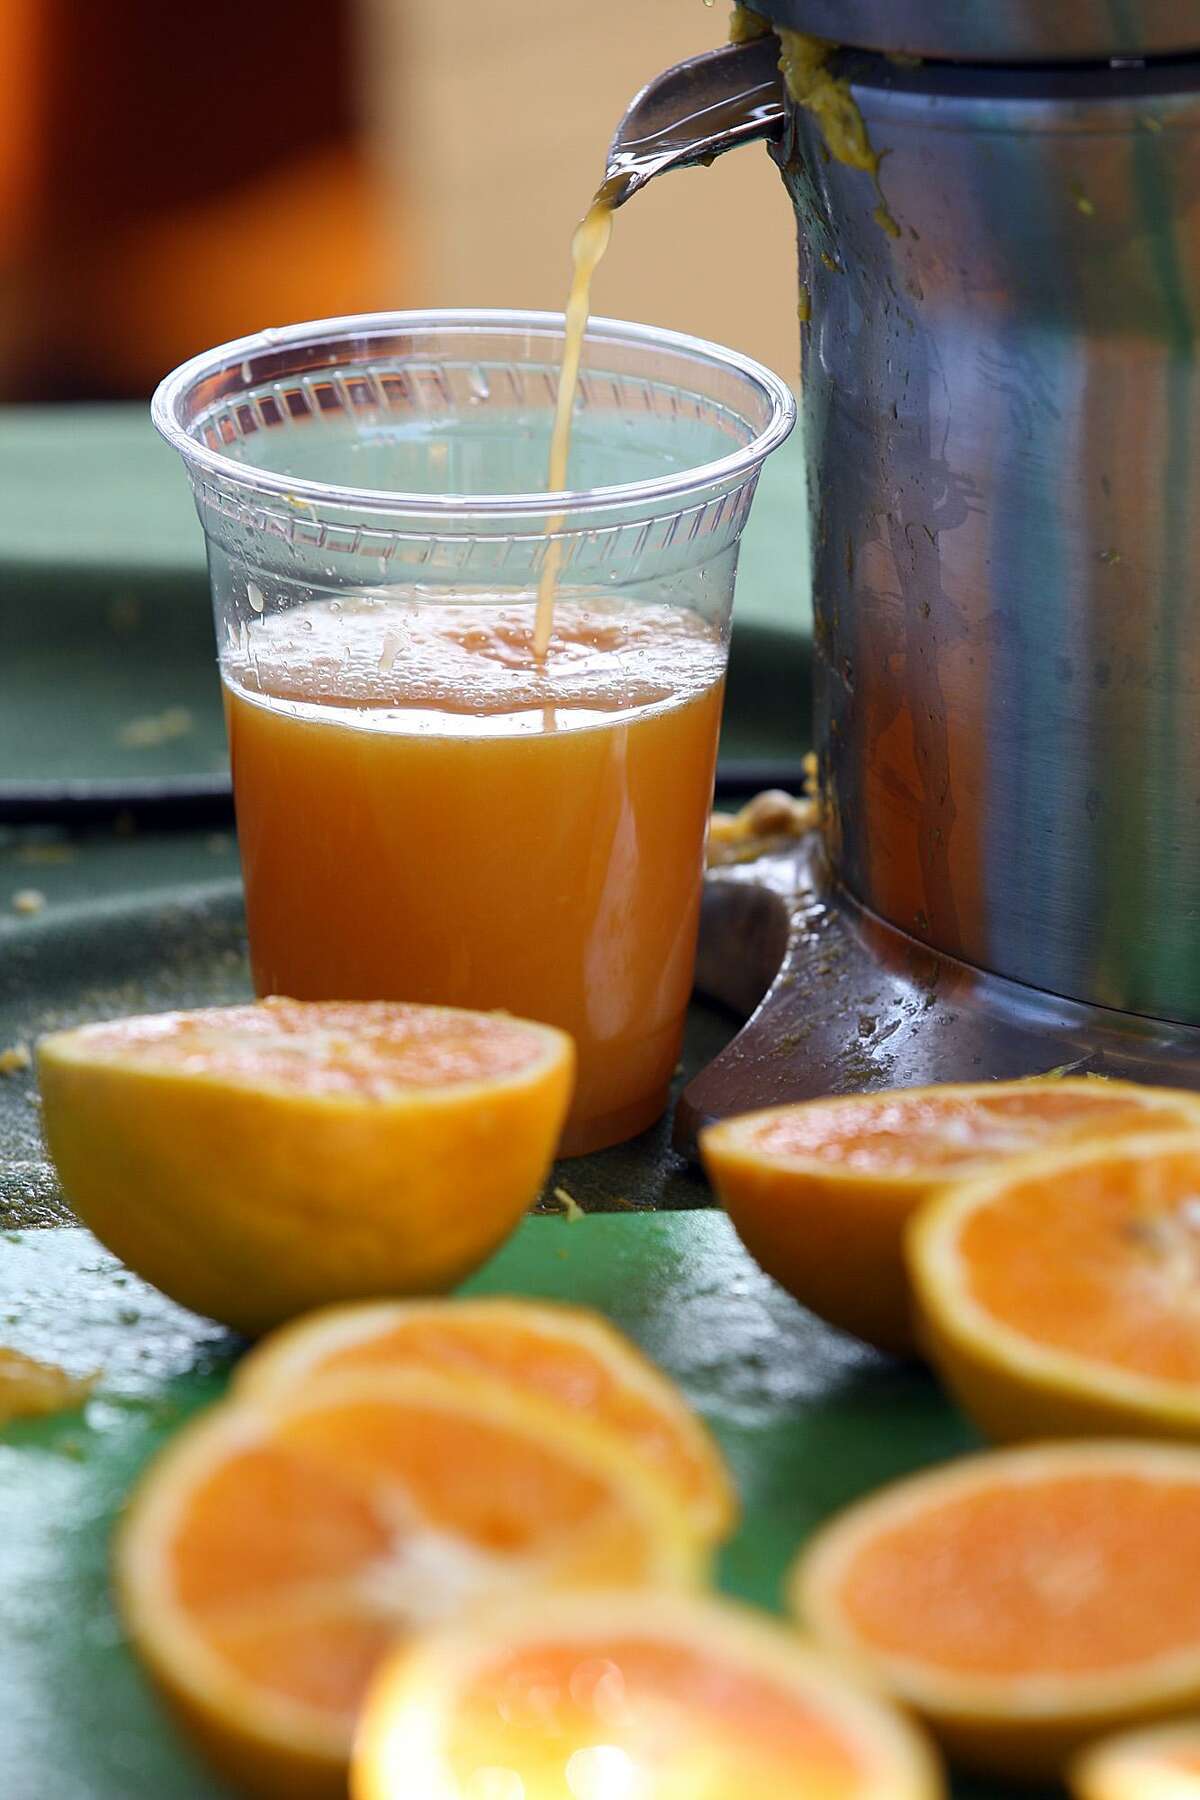 The American Academy of Pediatrics recently unveiled new guidelines on how much orange, apple and other kinds of juice children should drink.